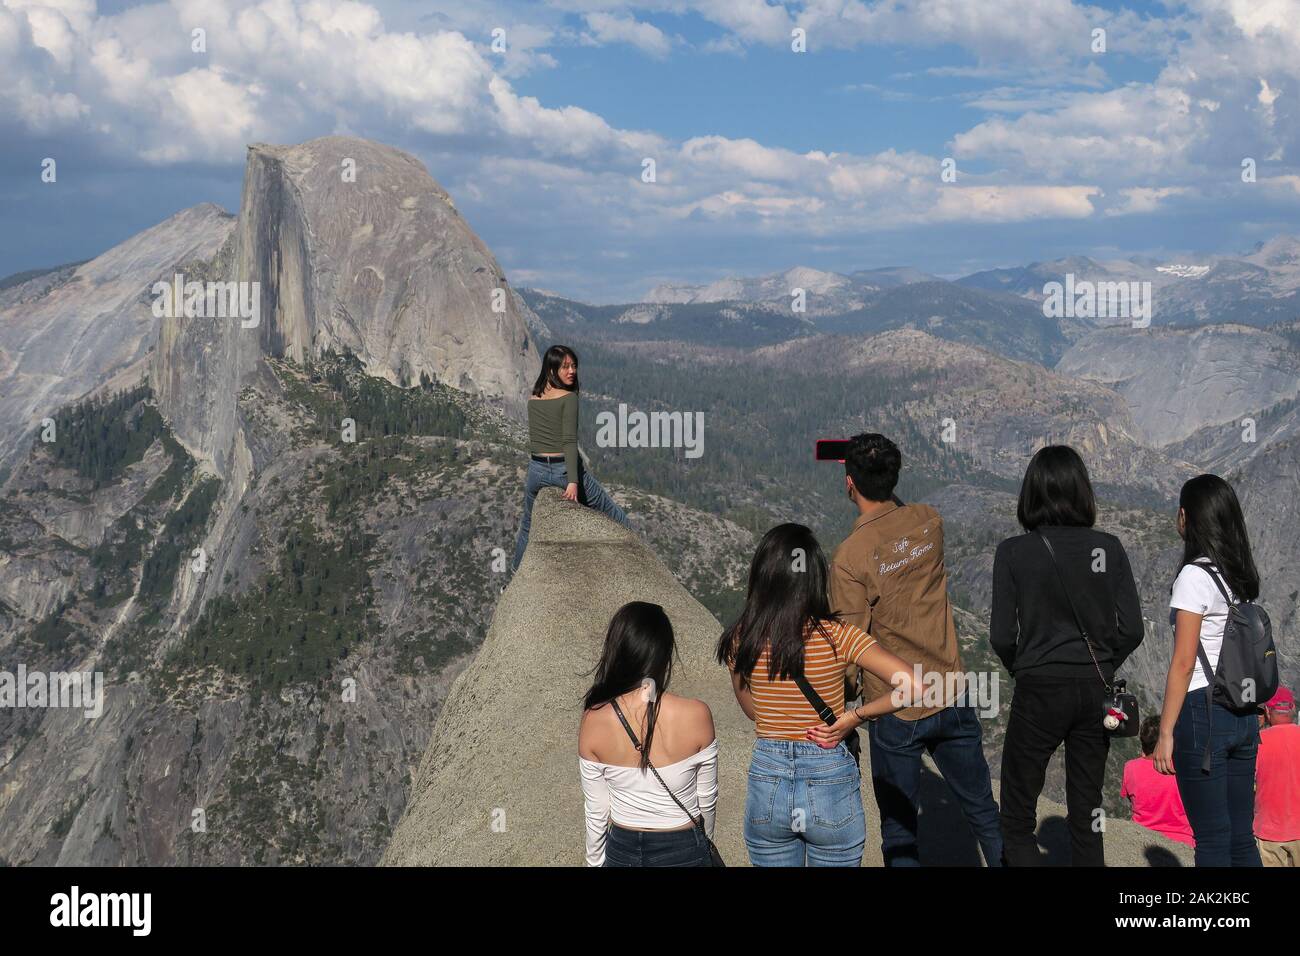 Tourist girl posing for a picture with group of friends admiring Half Dome Stock Photo